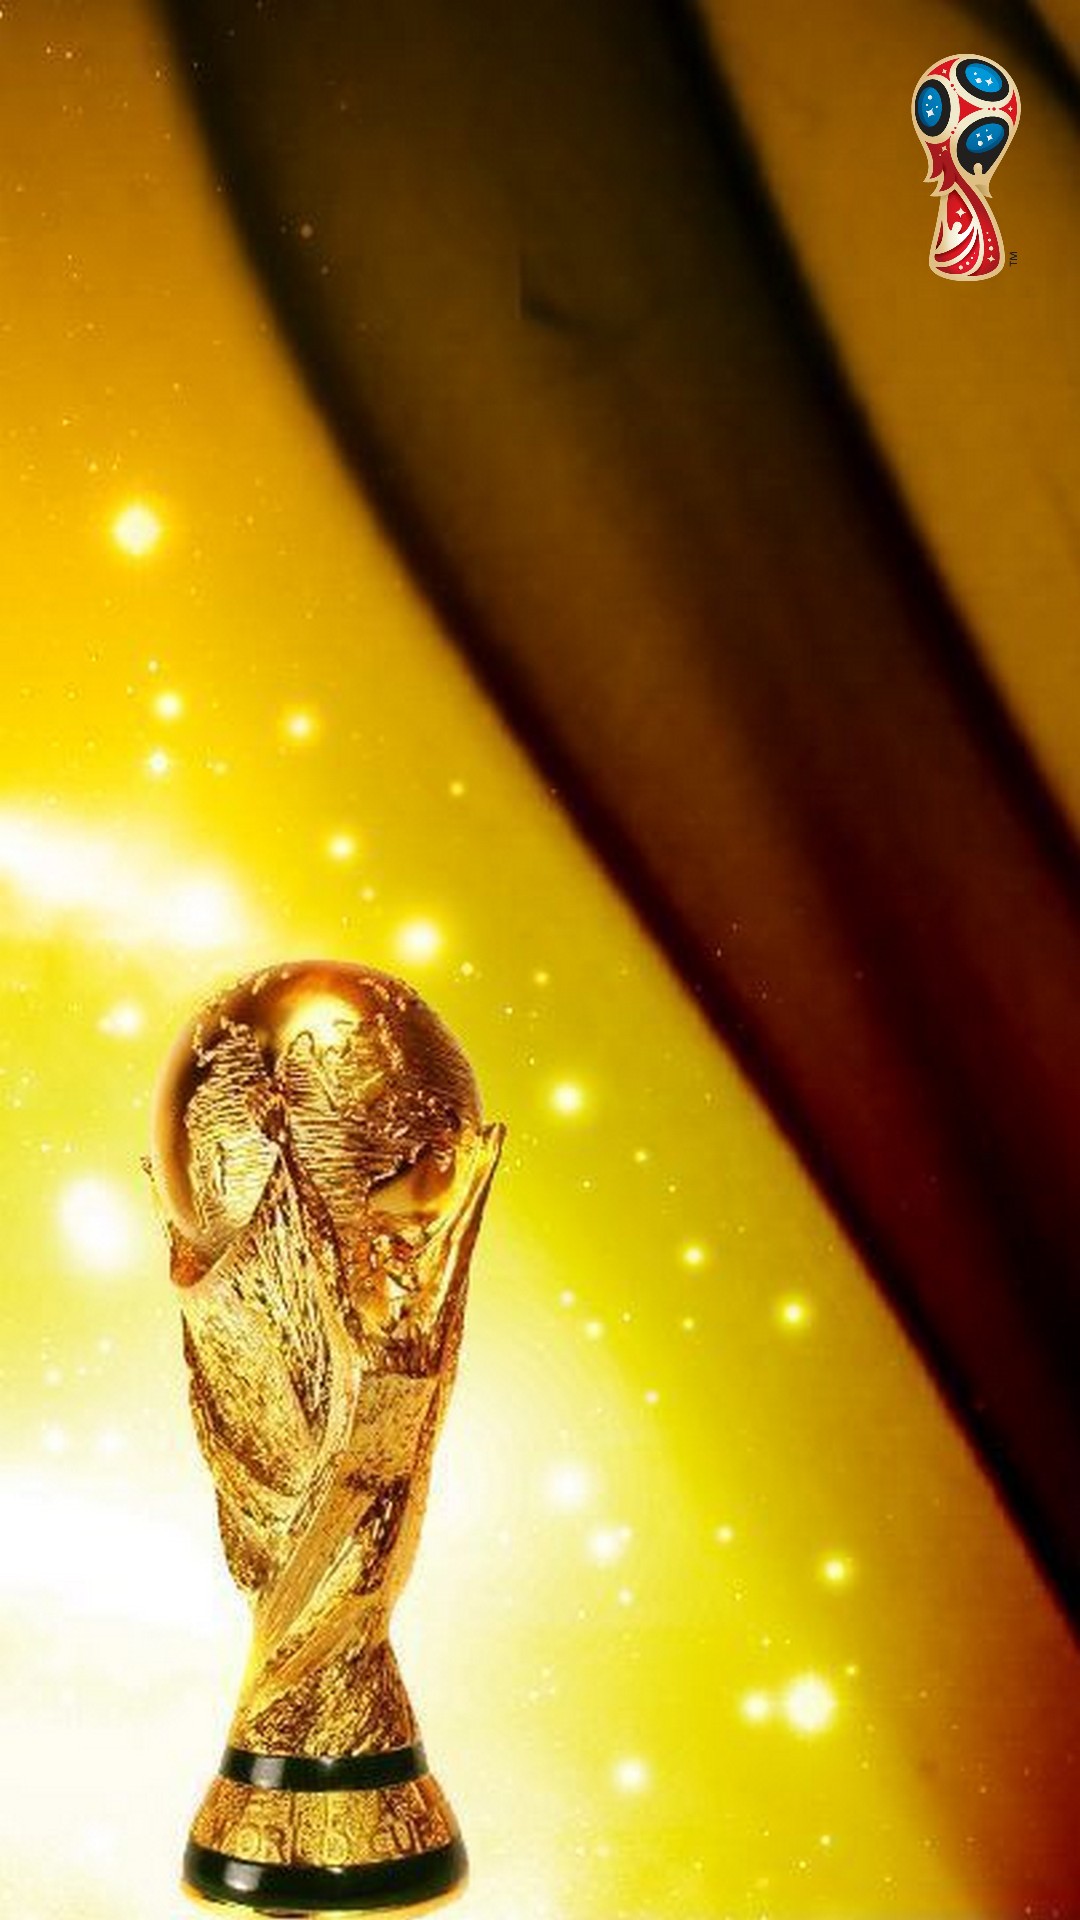 Iphone Wallpaper Hd Fifa World Cup With Resolution - Original World Cup Football Trophy - HD Wallpaper 